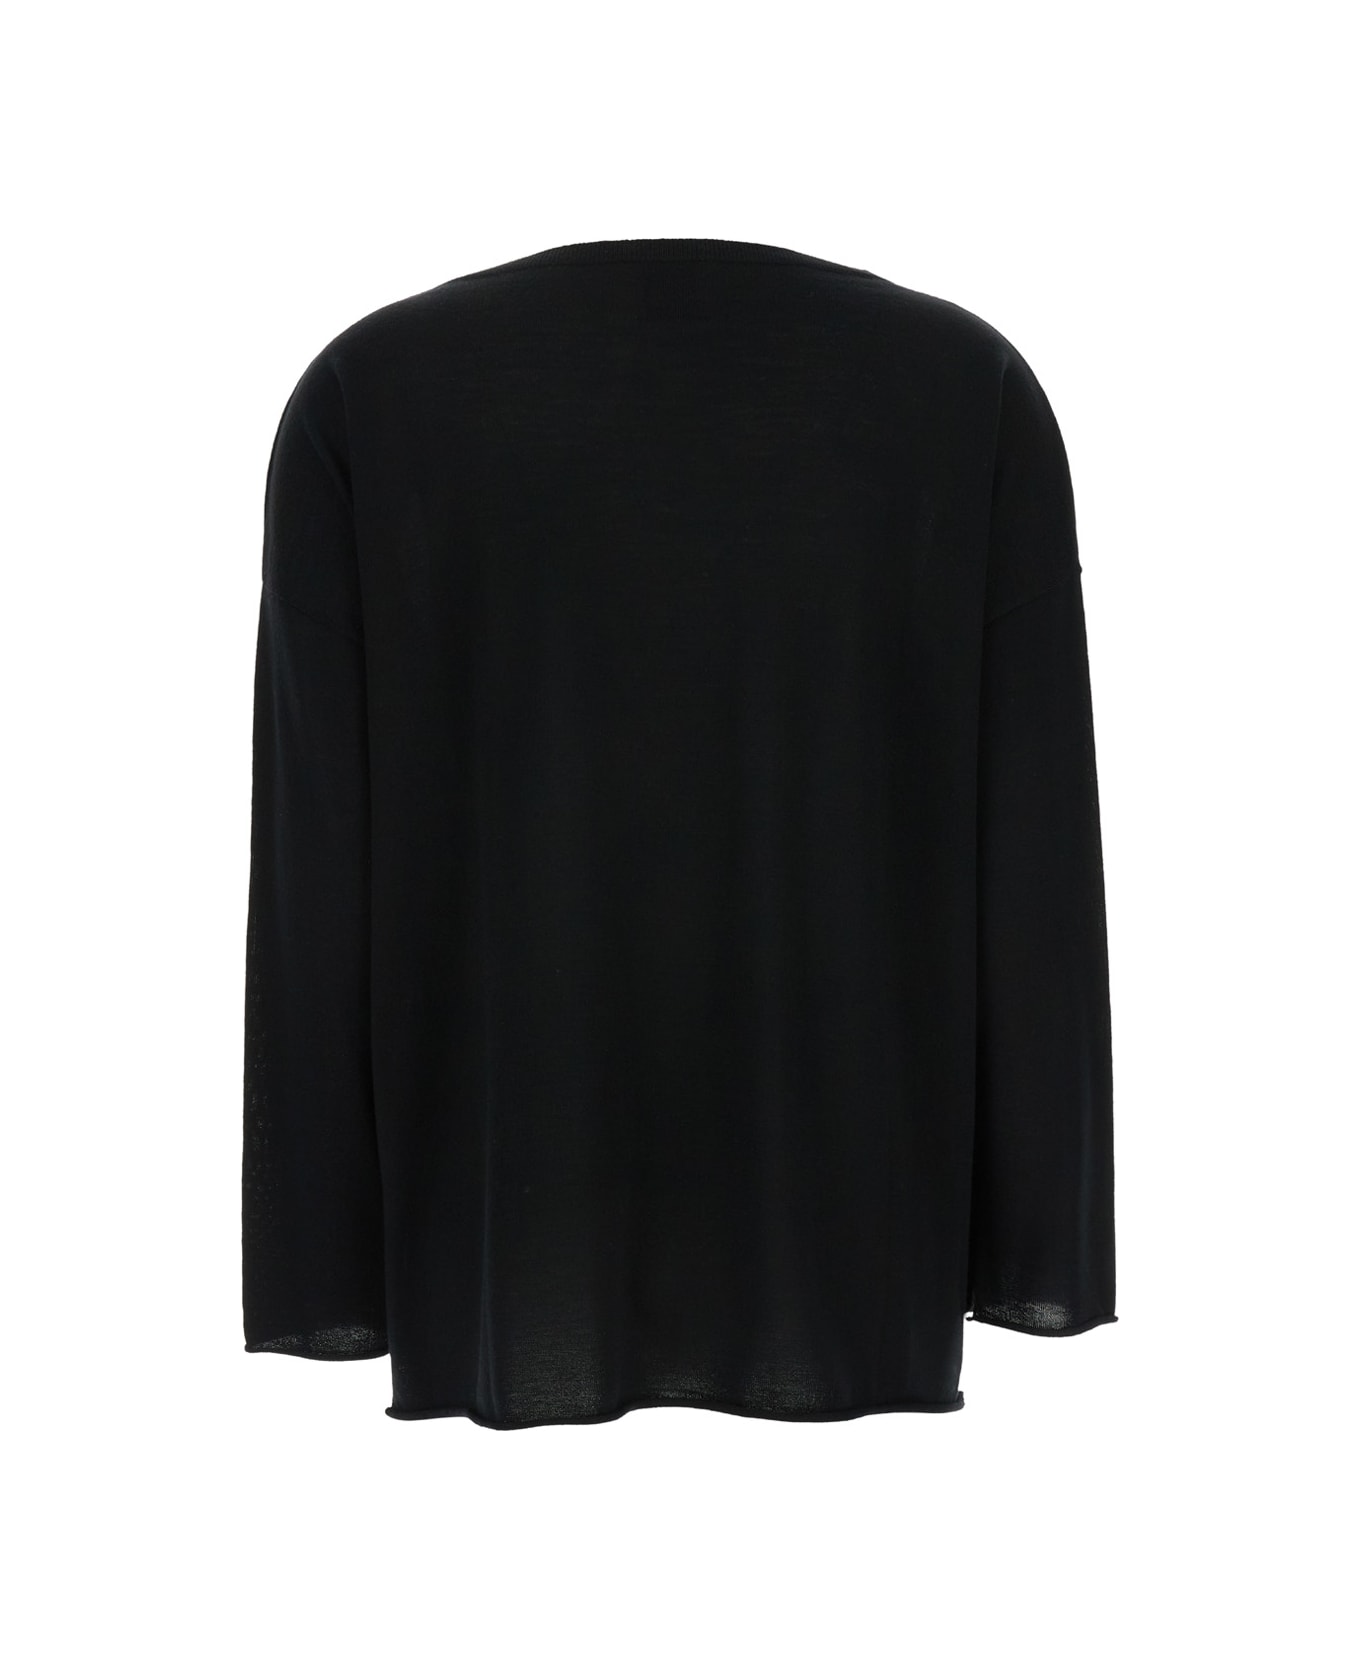 Allude Black Pullover With Boart Neckline In Wool Woman - Black ニットウェア